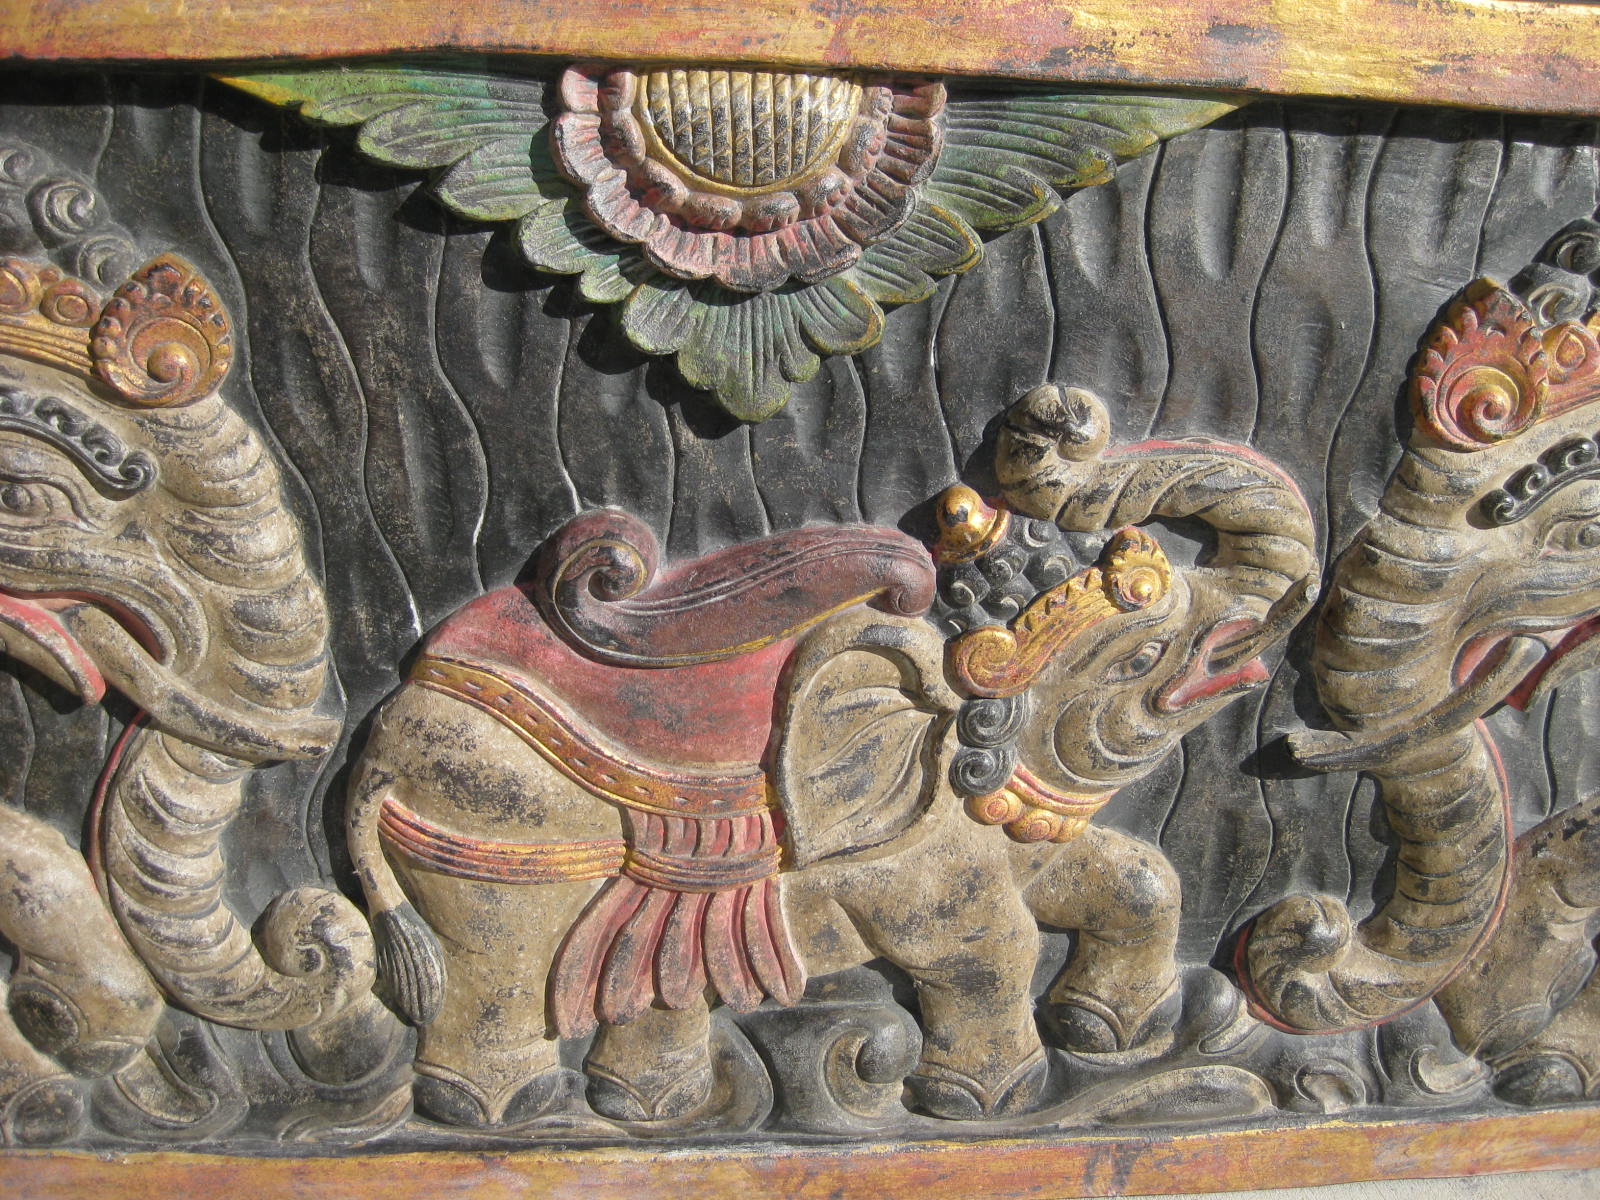 Extra Large Hand Carved Elephants Panel in Antique finish from Bali